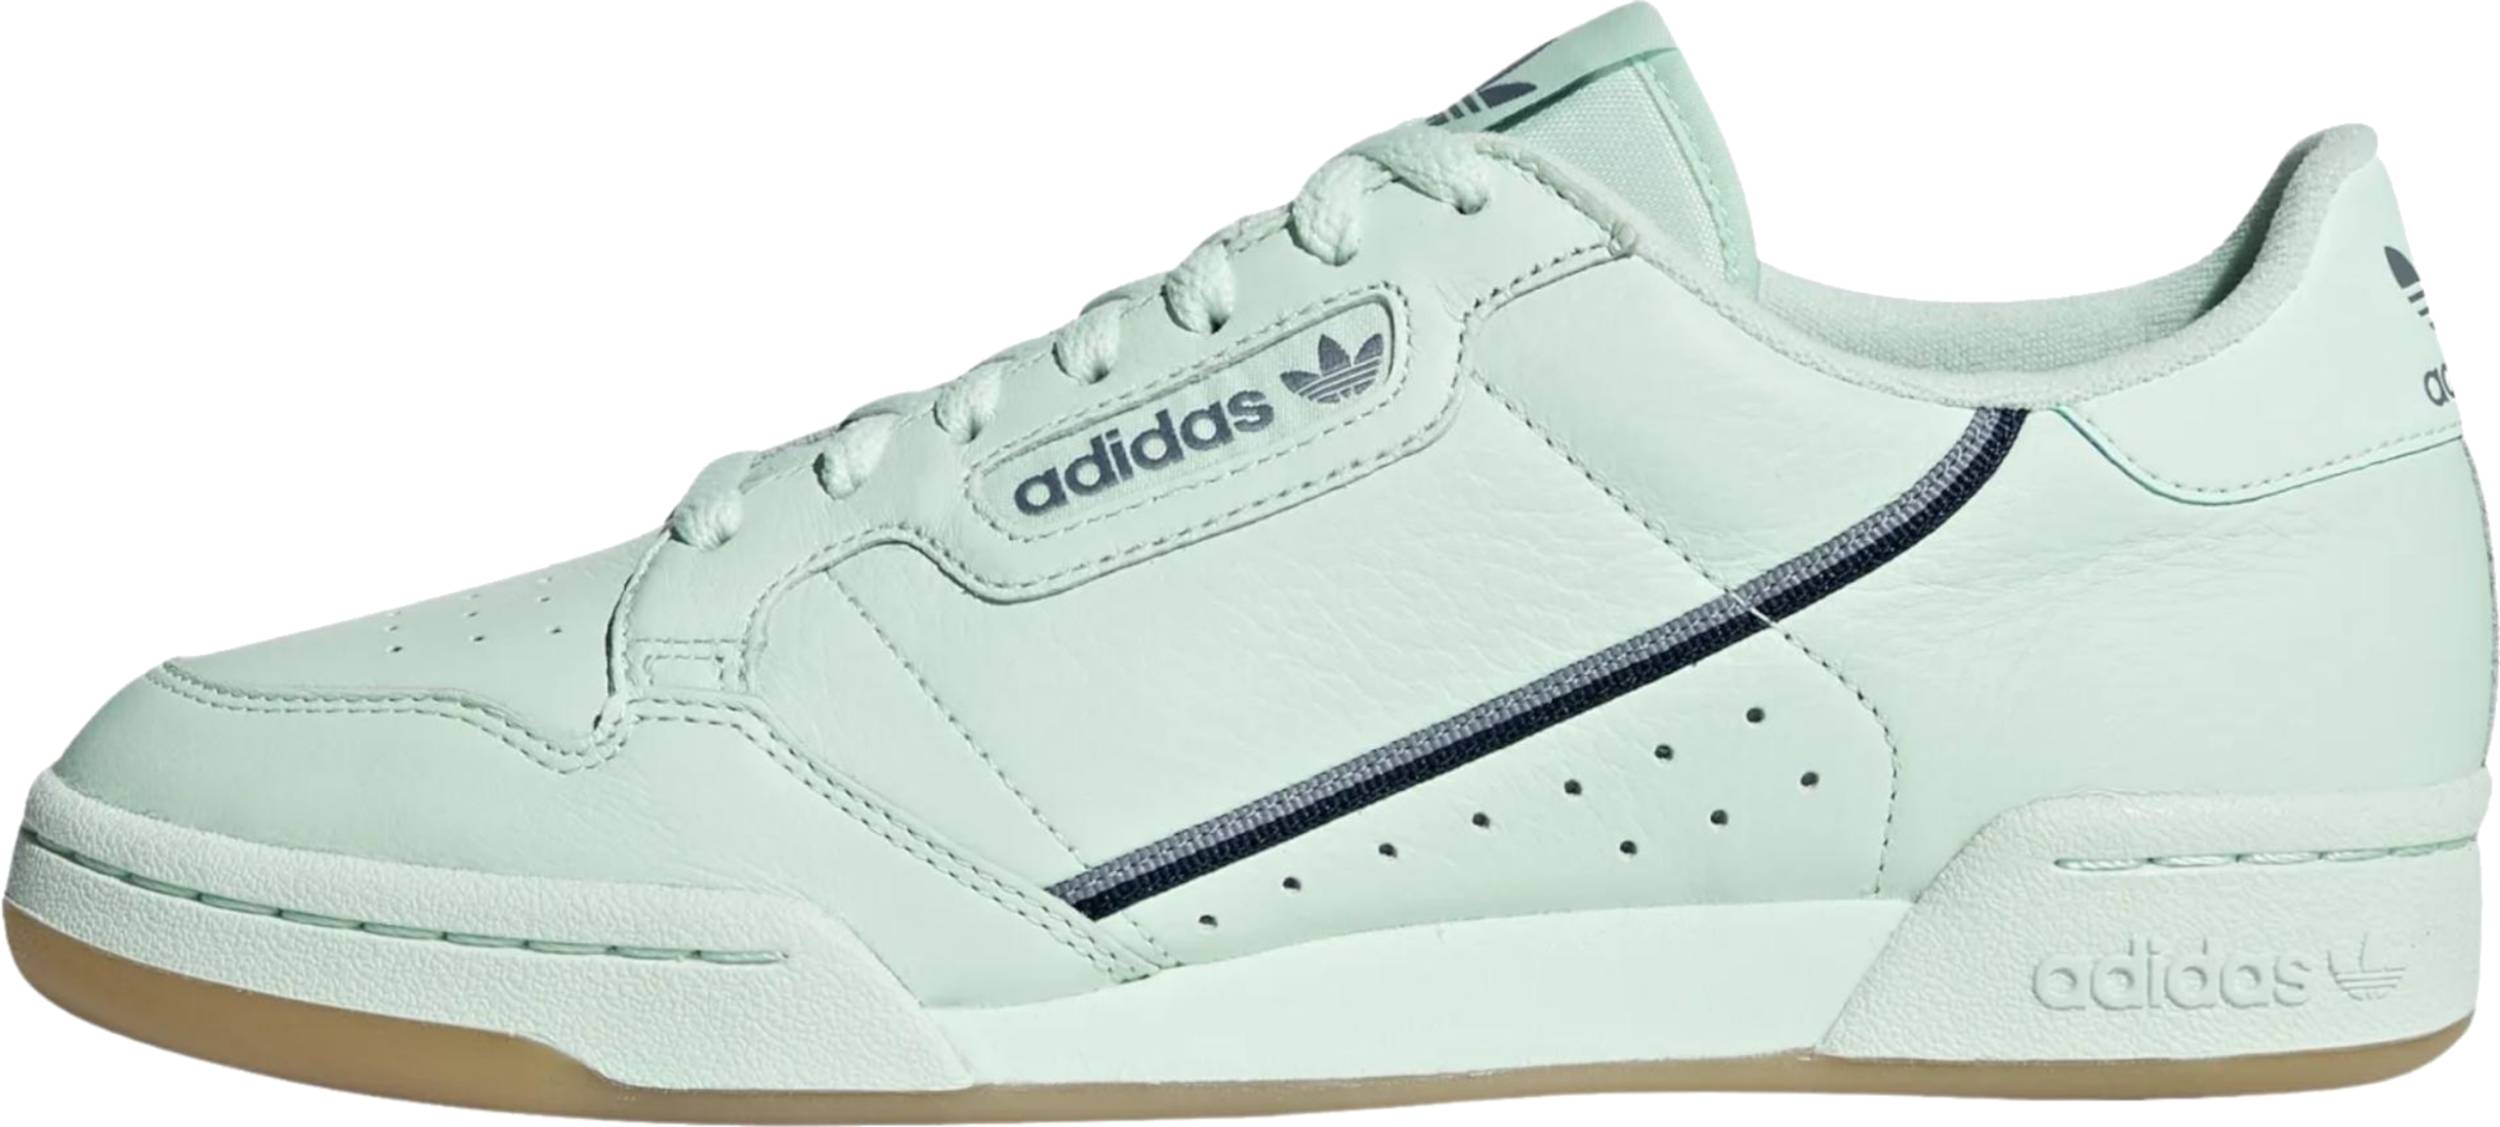 Save 50% on Green Tennis Sneakers (14 